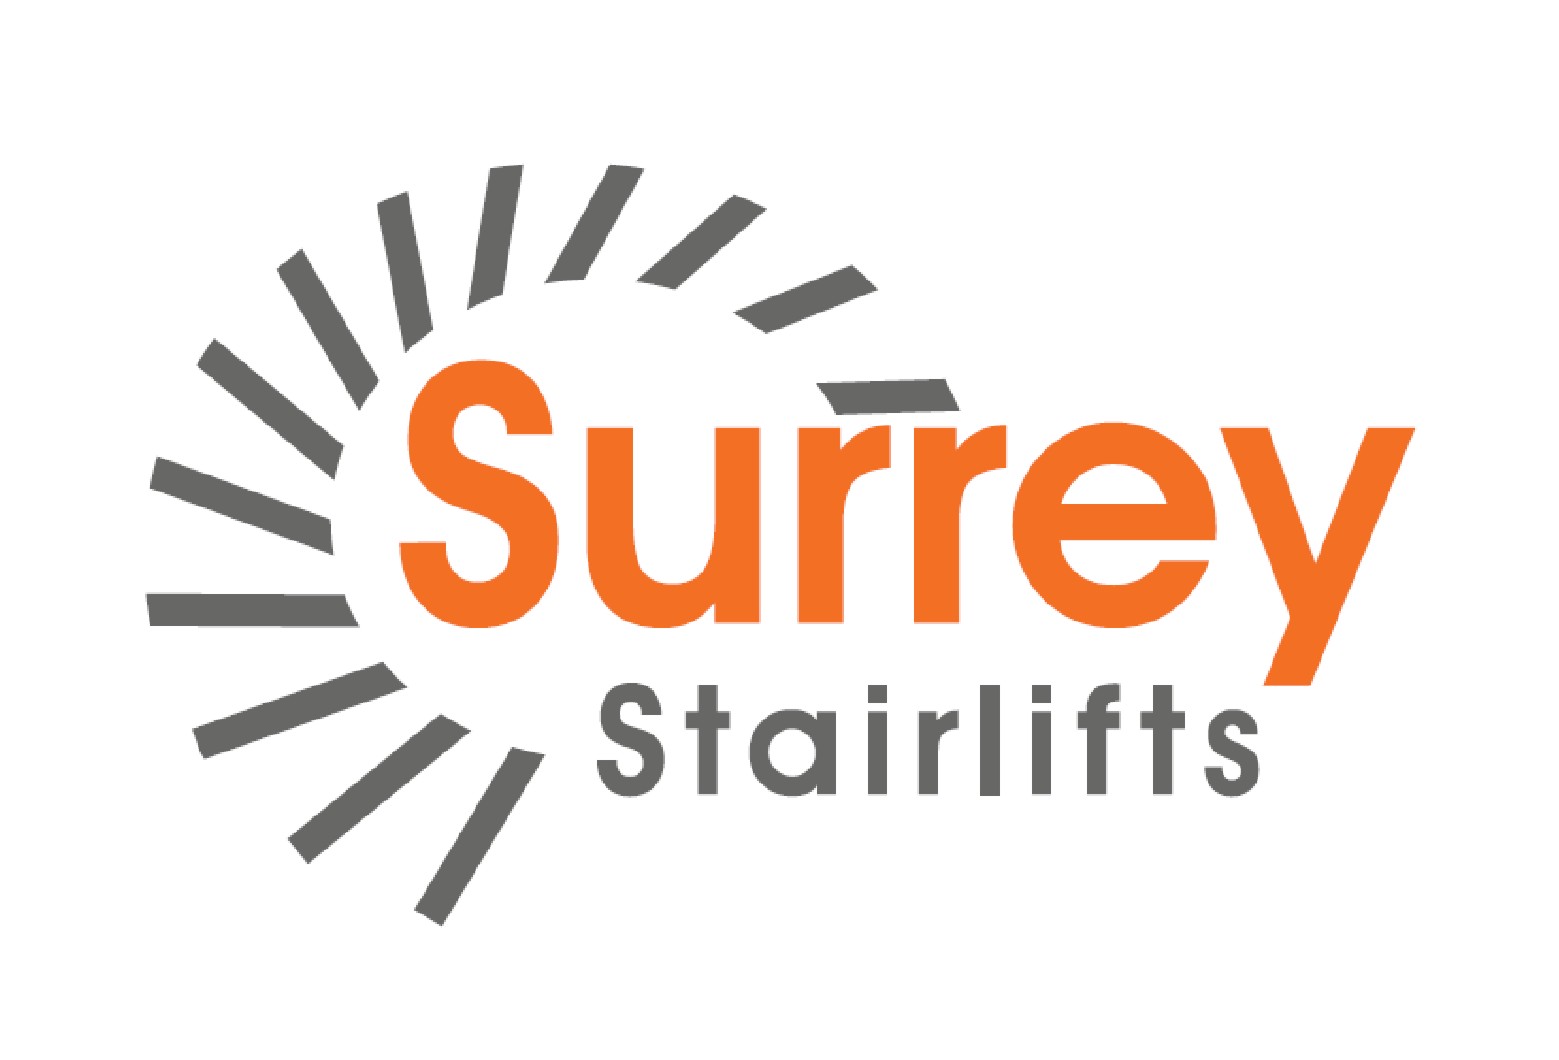 Surrey stairlifts logo